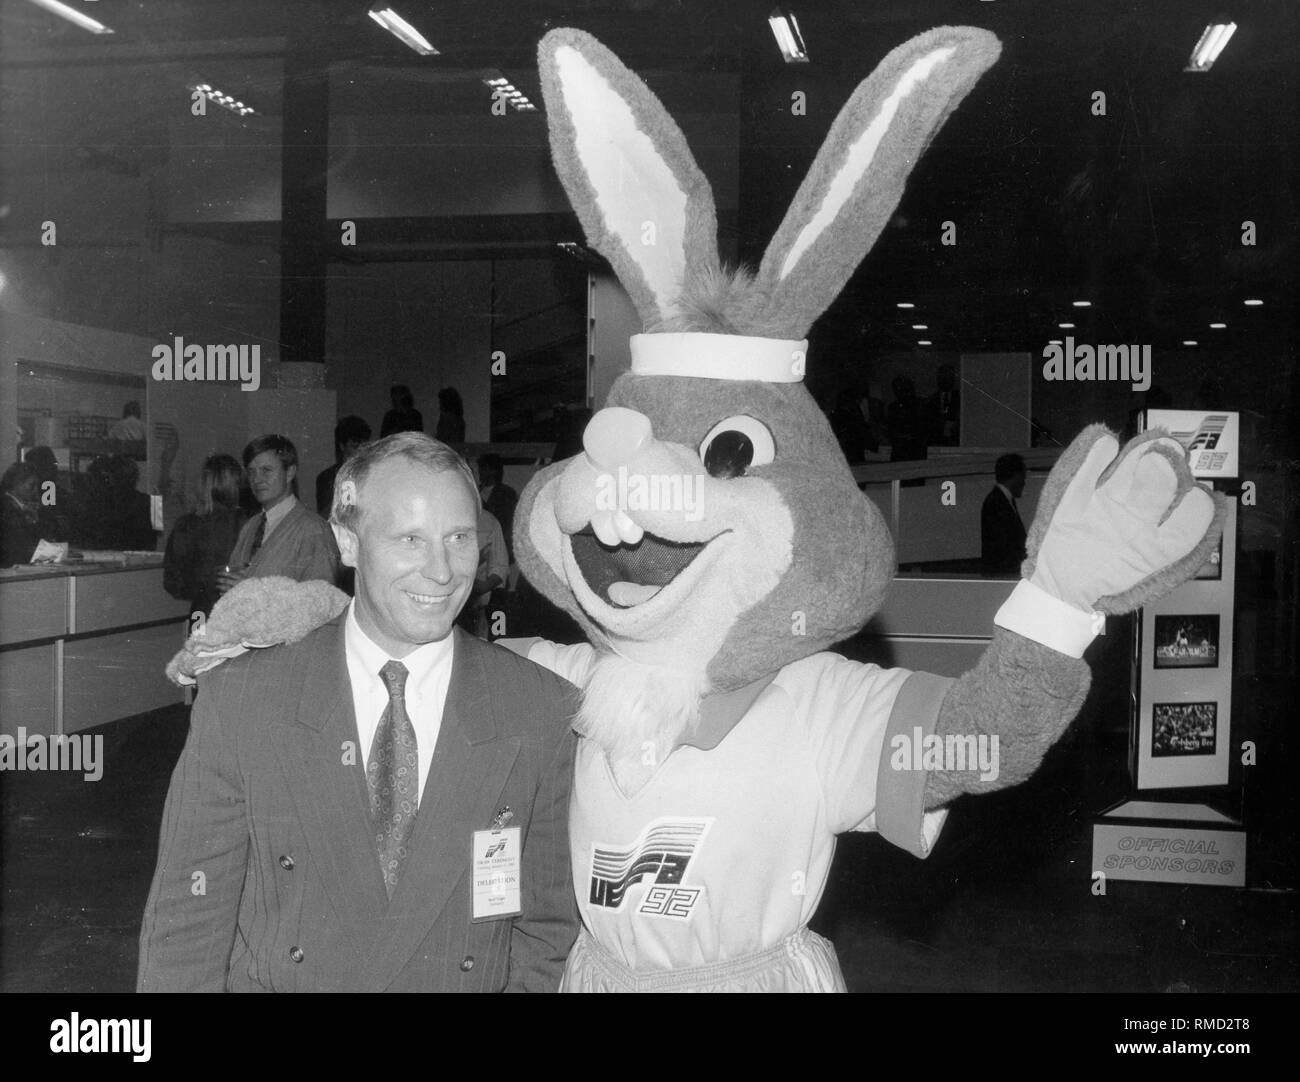 National coach Berti Vogts with the EM mascot at the draw for the European Football Championship 1992 in Sweden. Stock Photo